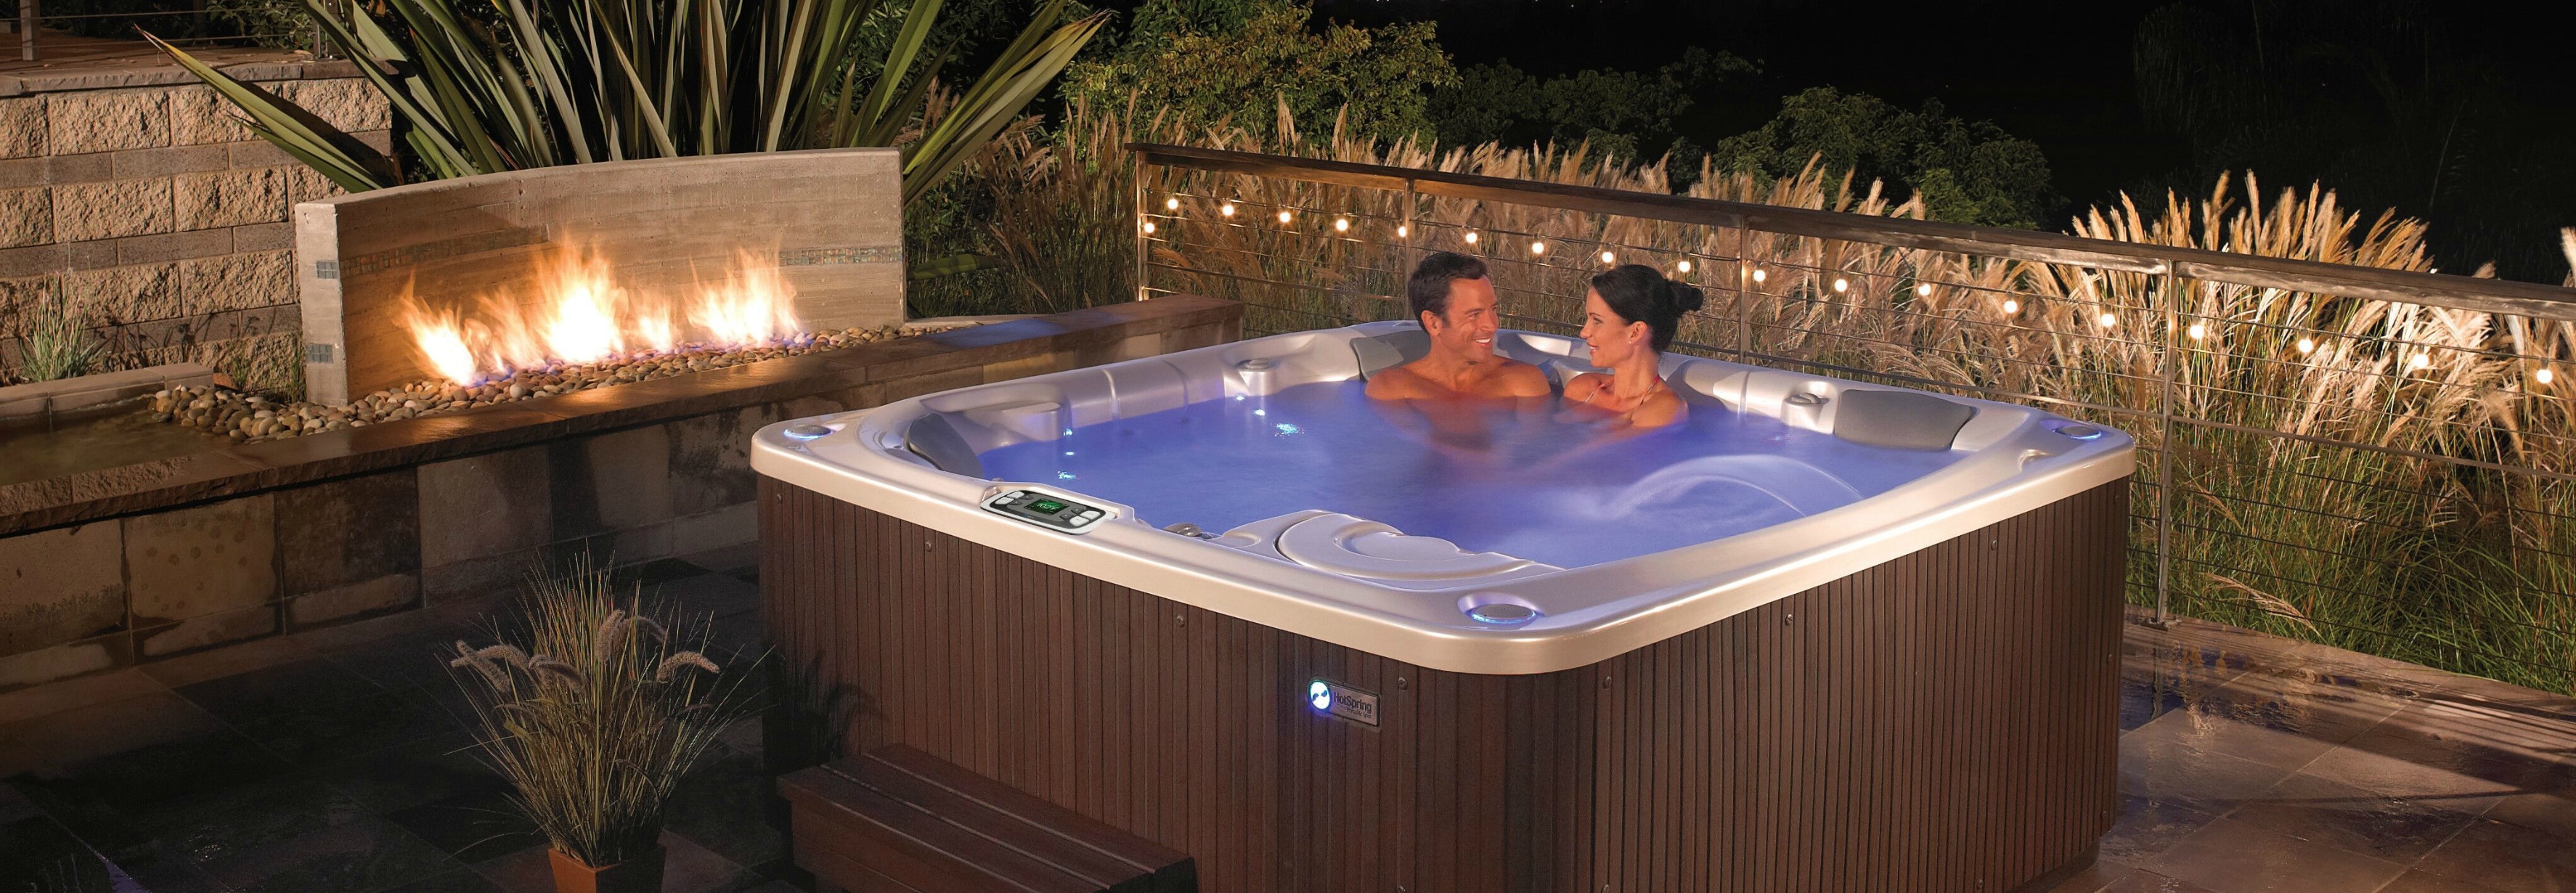 What’s the Difference Between a Jacuzzi and a Hot Tub?